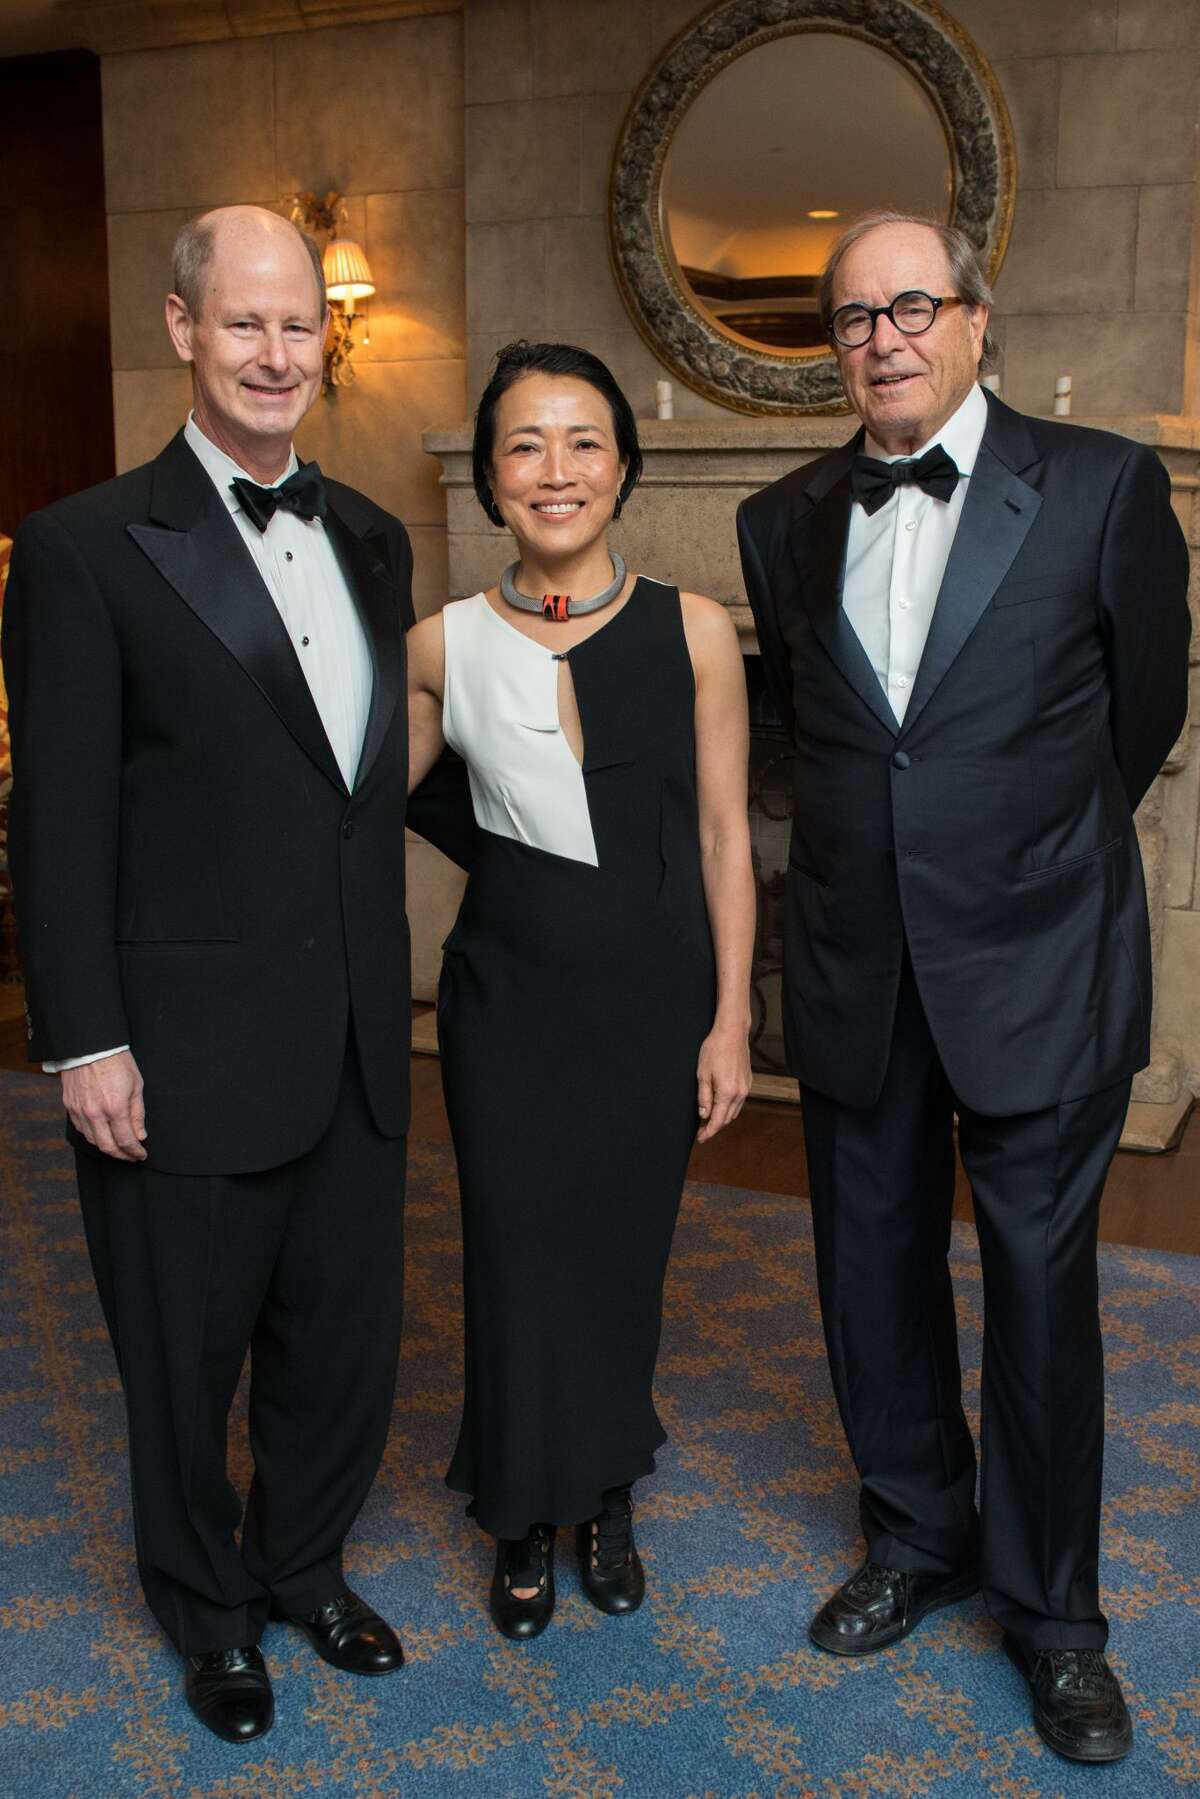 2018 Inprint Poets & Writers Ball at The Houstonian Hotel with Ball Chairs Eddie Allen and Chinhui Juhn, featured speaker Paul Theroux